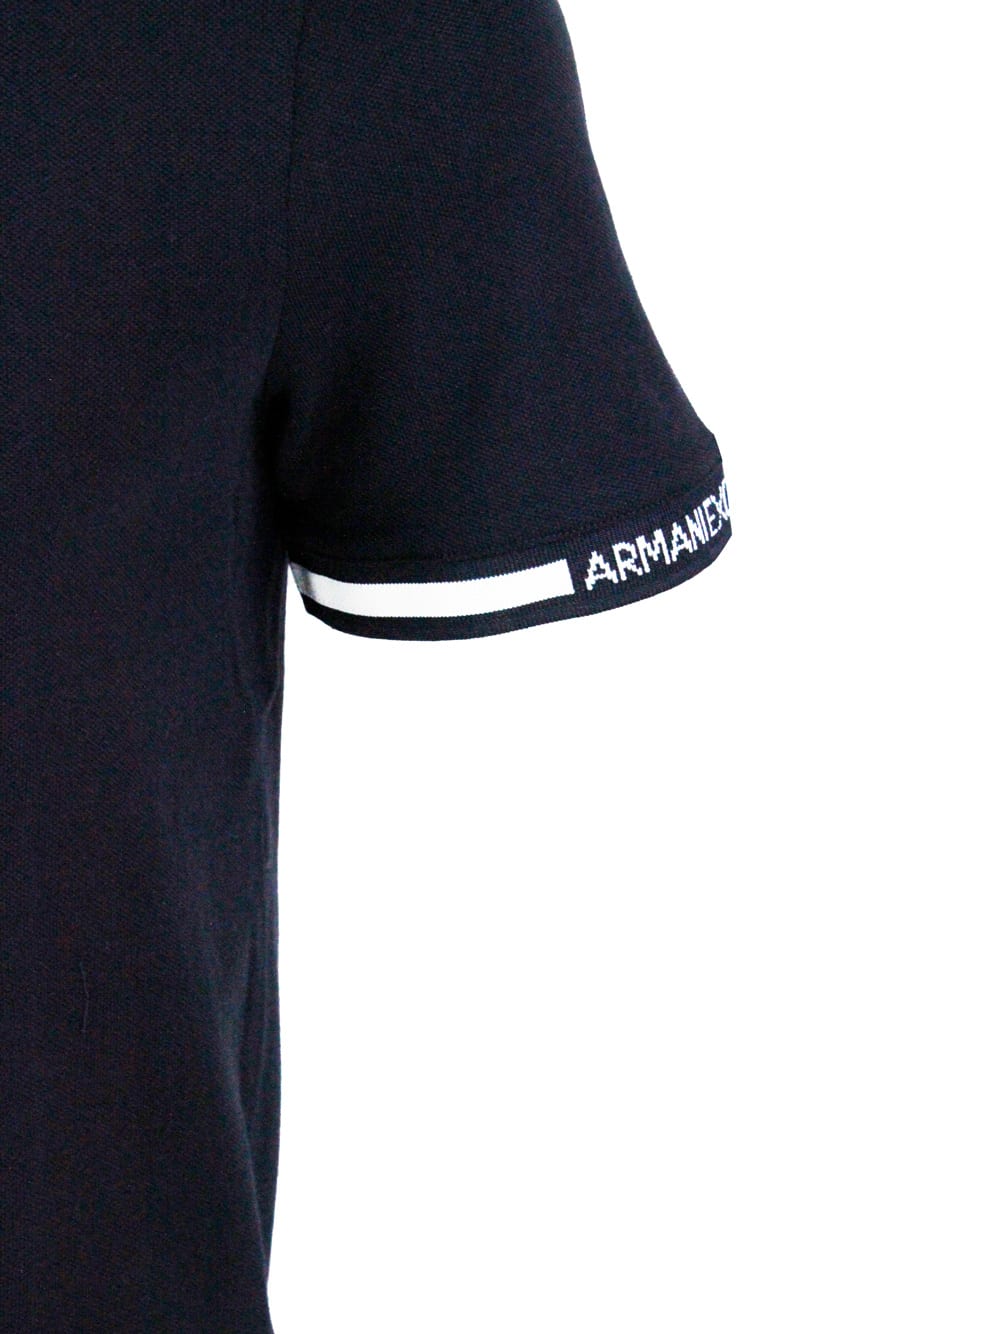 Shop Armani Collezioni Hort-sleeved Pique Cotton Polo Shirt With Zip Closure And Writing On The Collar In Blue